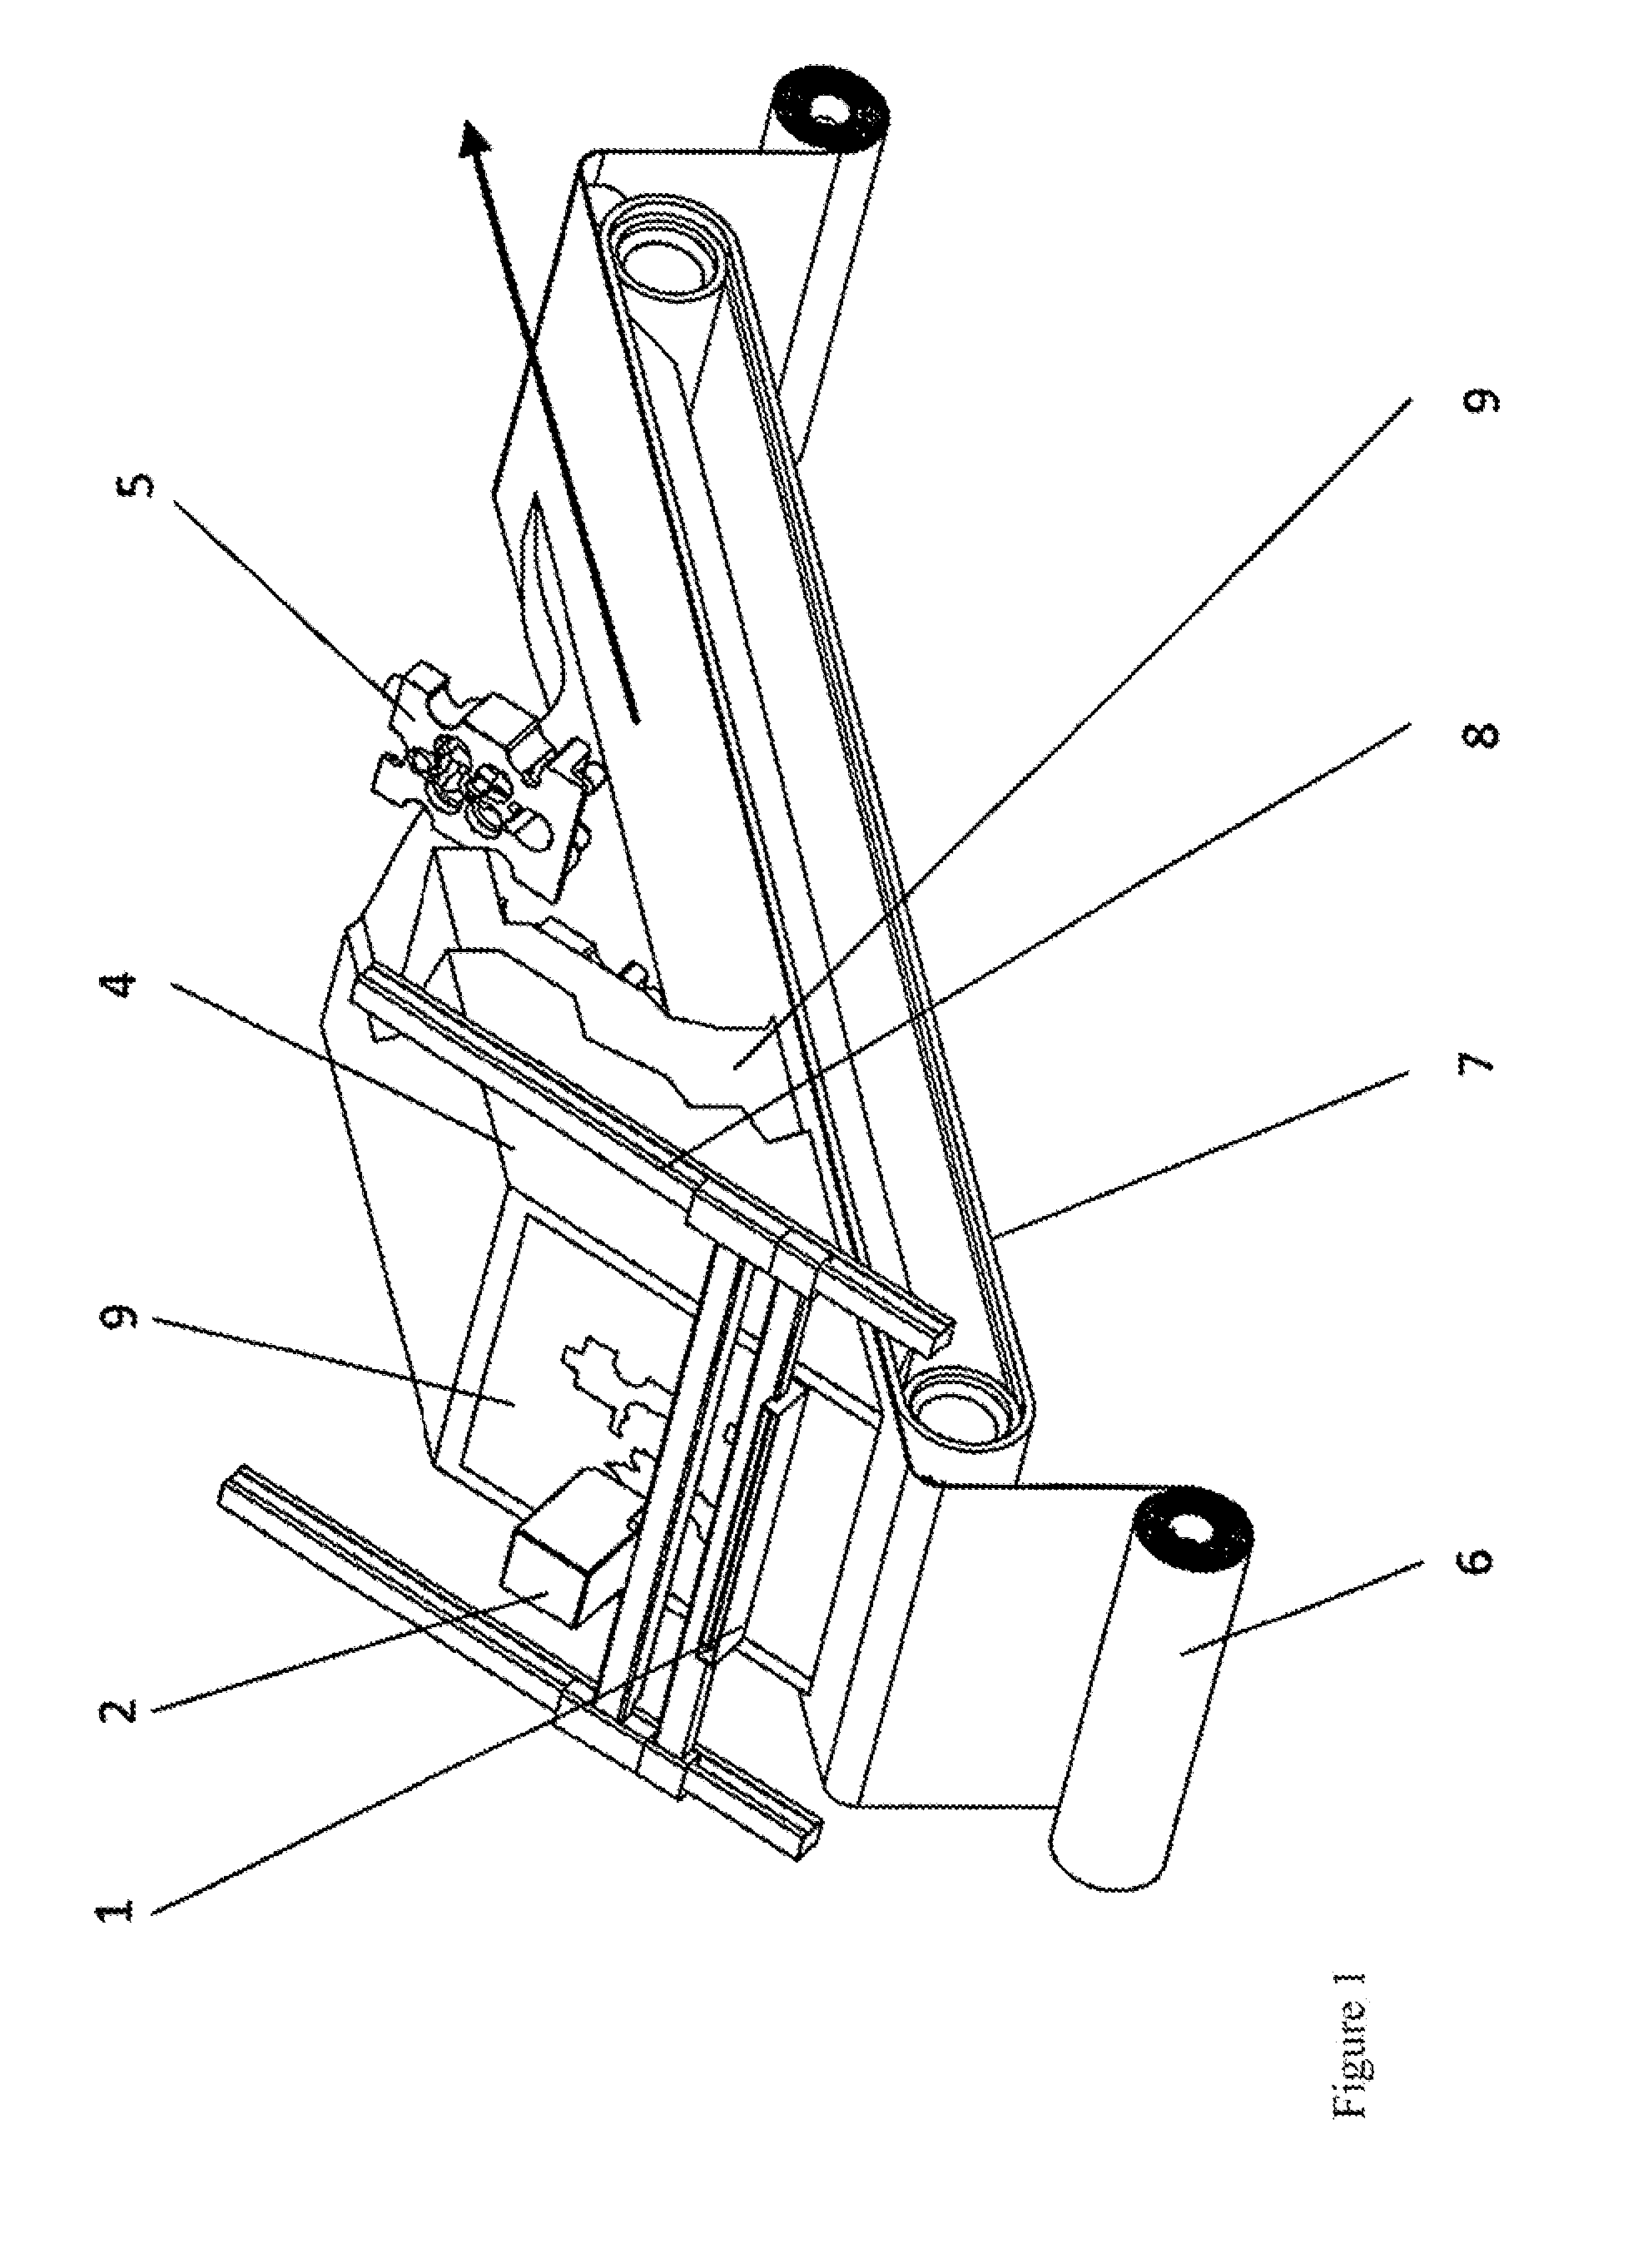 Device for producing three-dimensional models with special building platforms and drive systems